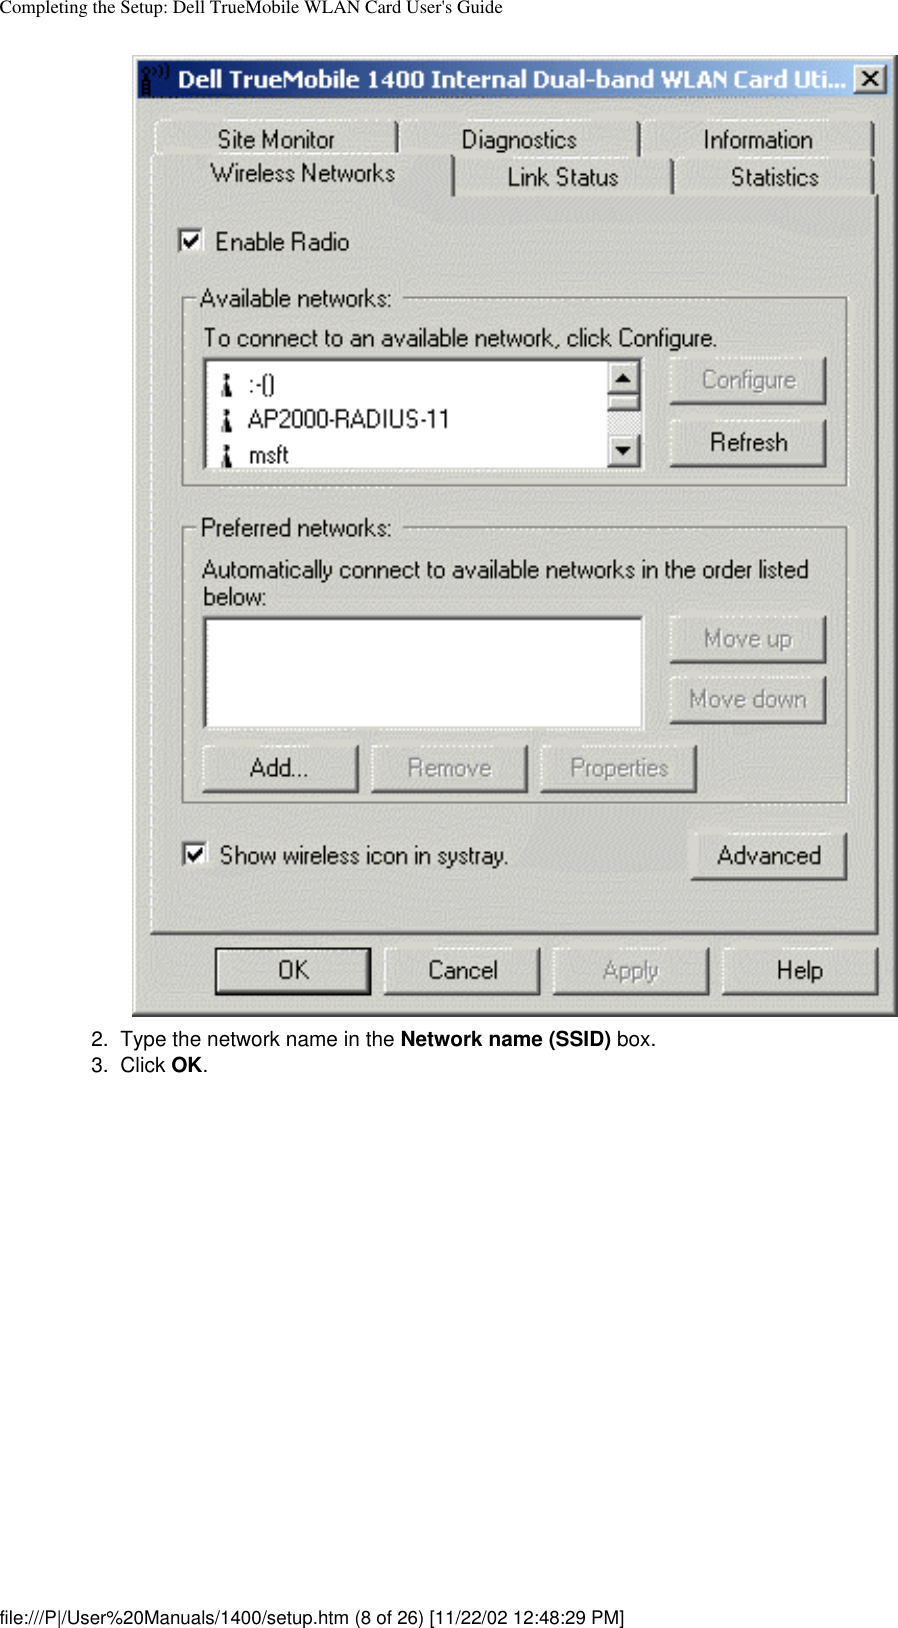 Completing the Setup: Dell TrueMobile WLAN Card User&apos;s Guide2.  Type the network name in the Network name (SSID) box.3.  Click OK. file:///P|/User%20Manuals/1400/setup.htm (8 of 26) [11/22/02 12:48:29 PM]